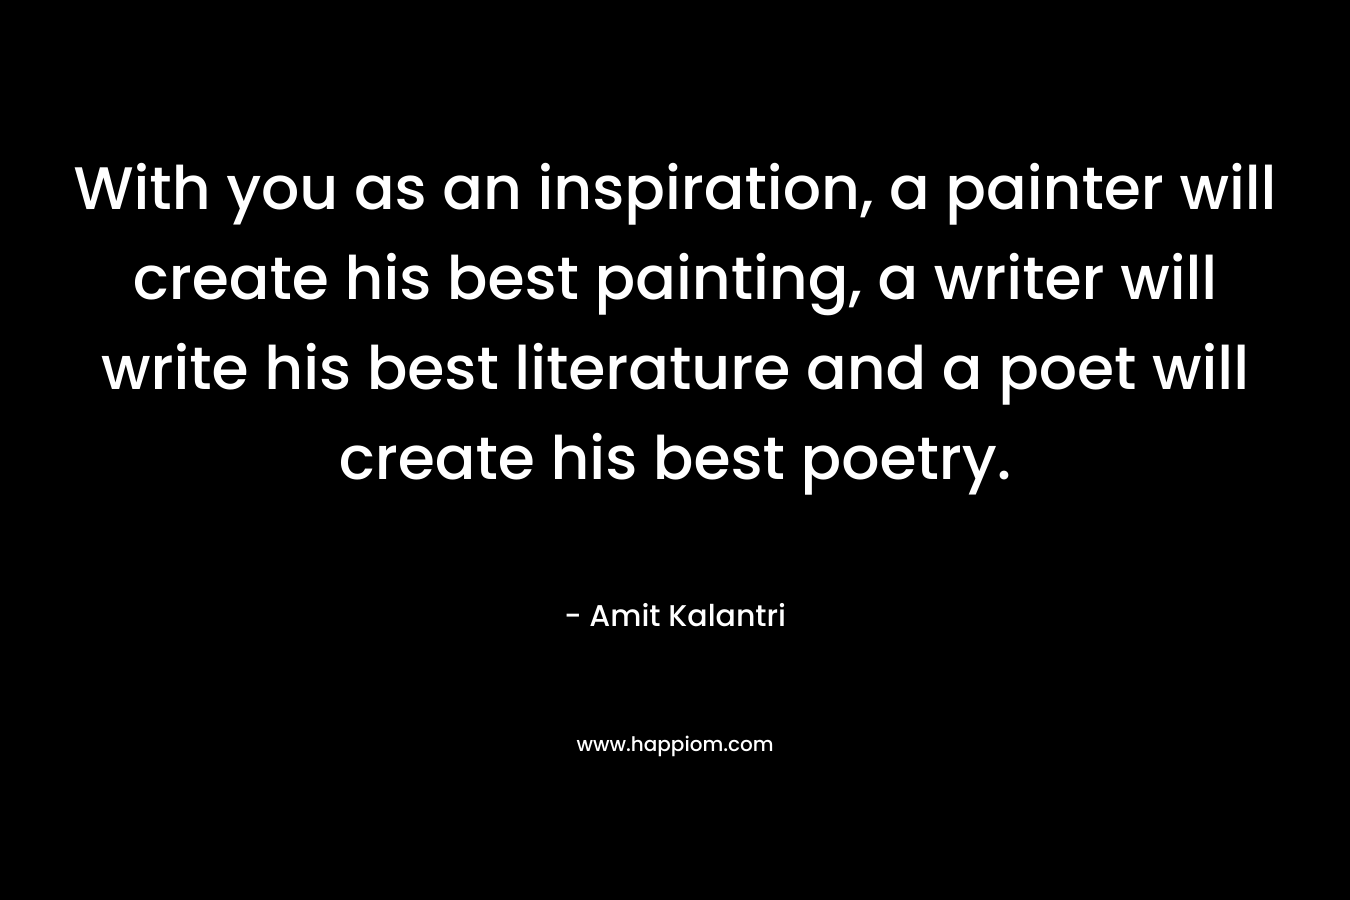 With you as an inspiration, a painter will create his best painting, a writer will write his best literature and a poet will create his best poetry. – Amit Kalantri